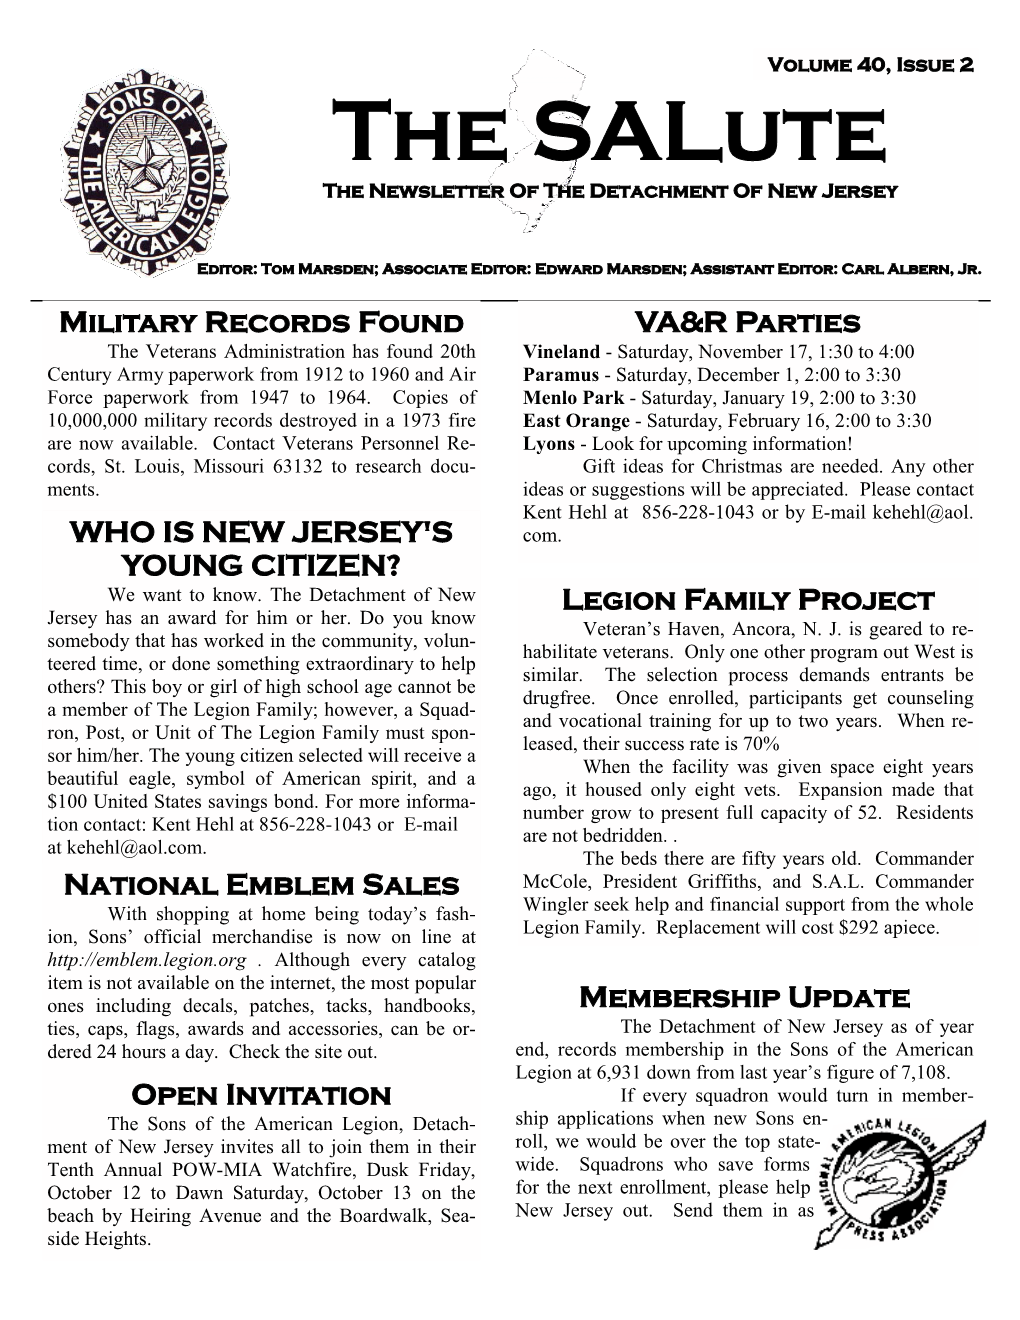 The Salute the Newsletter of the Detachment of New Jersey